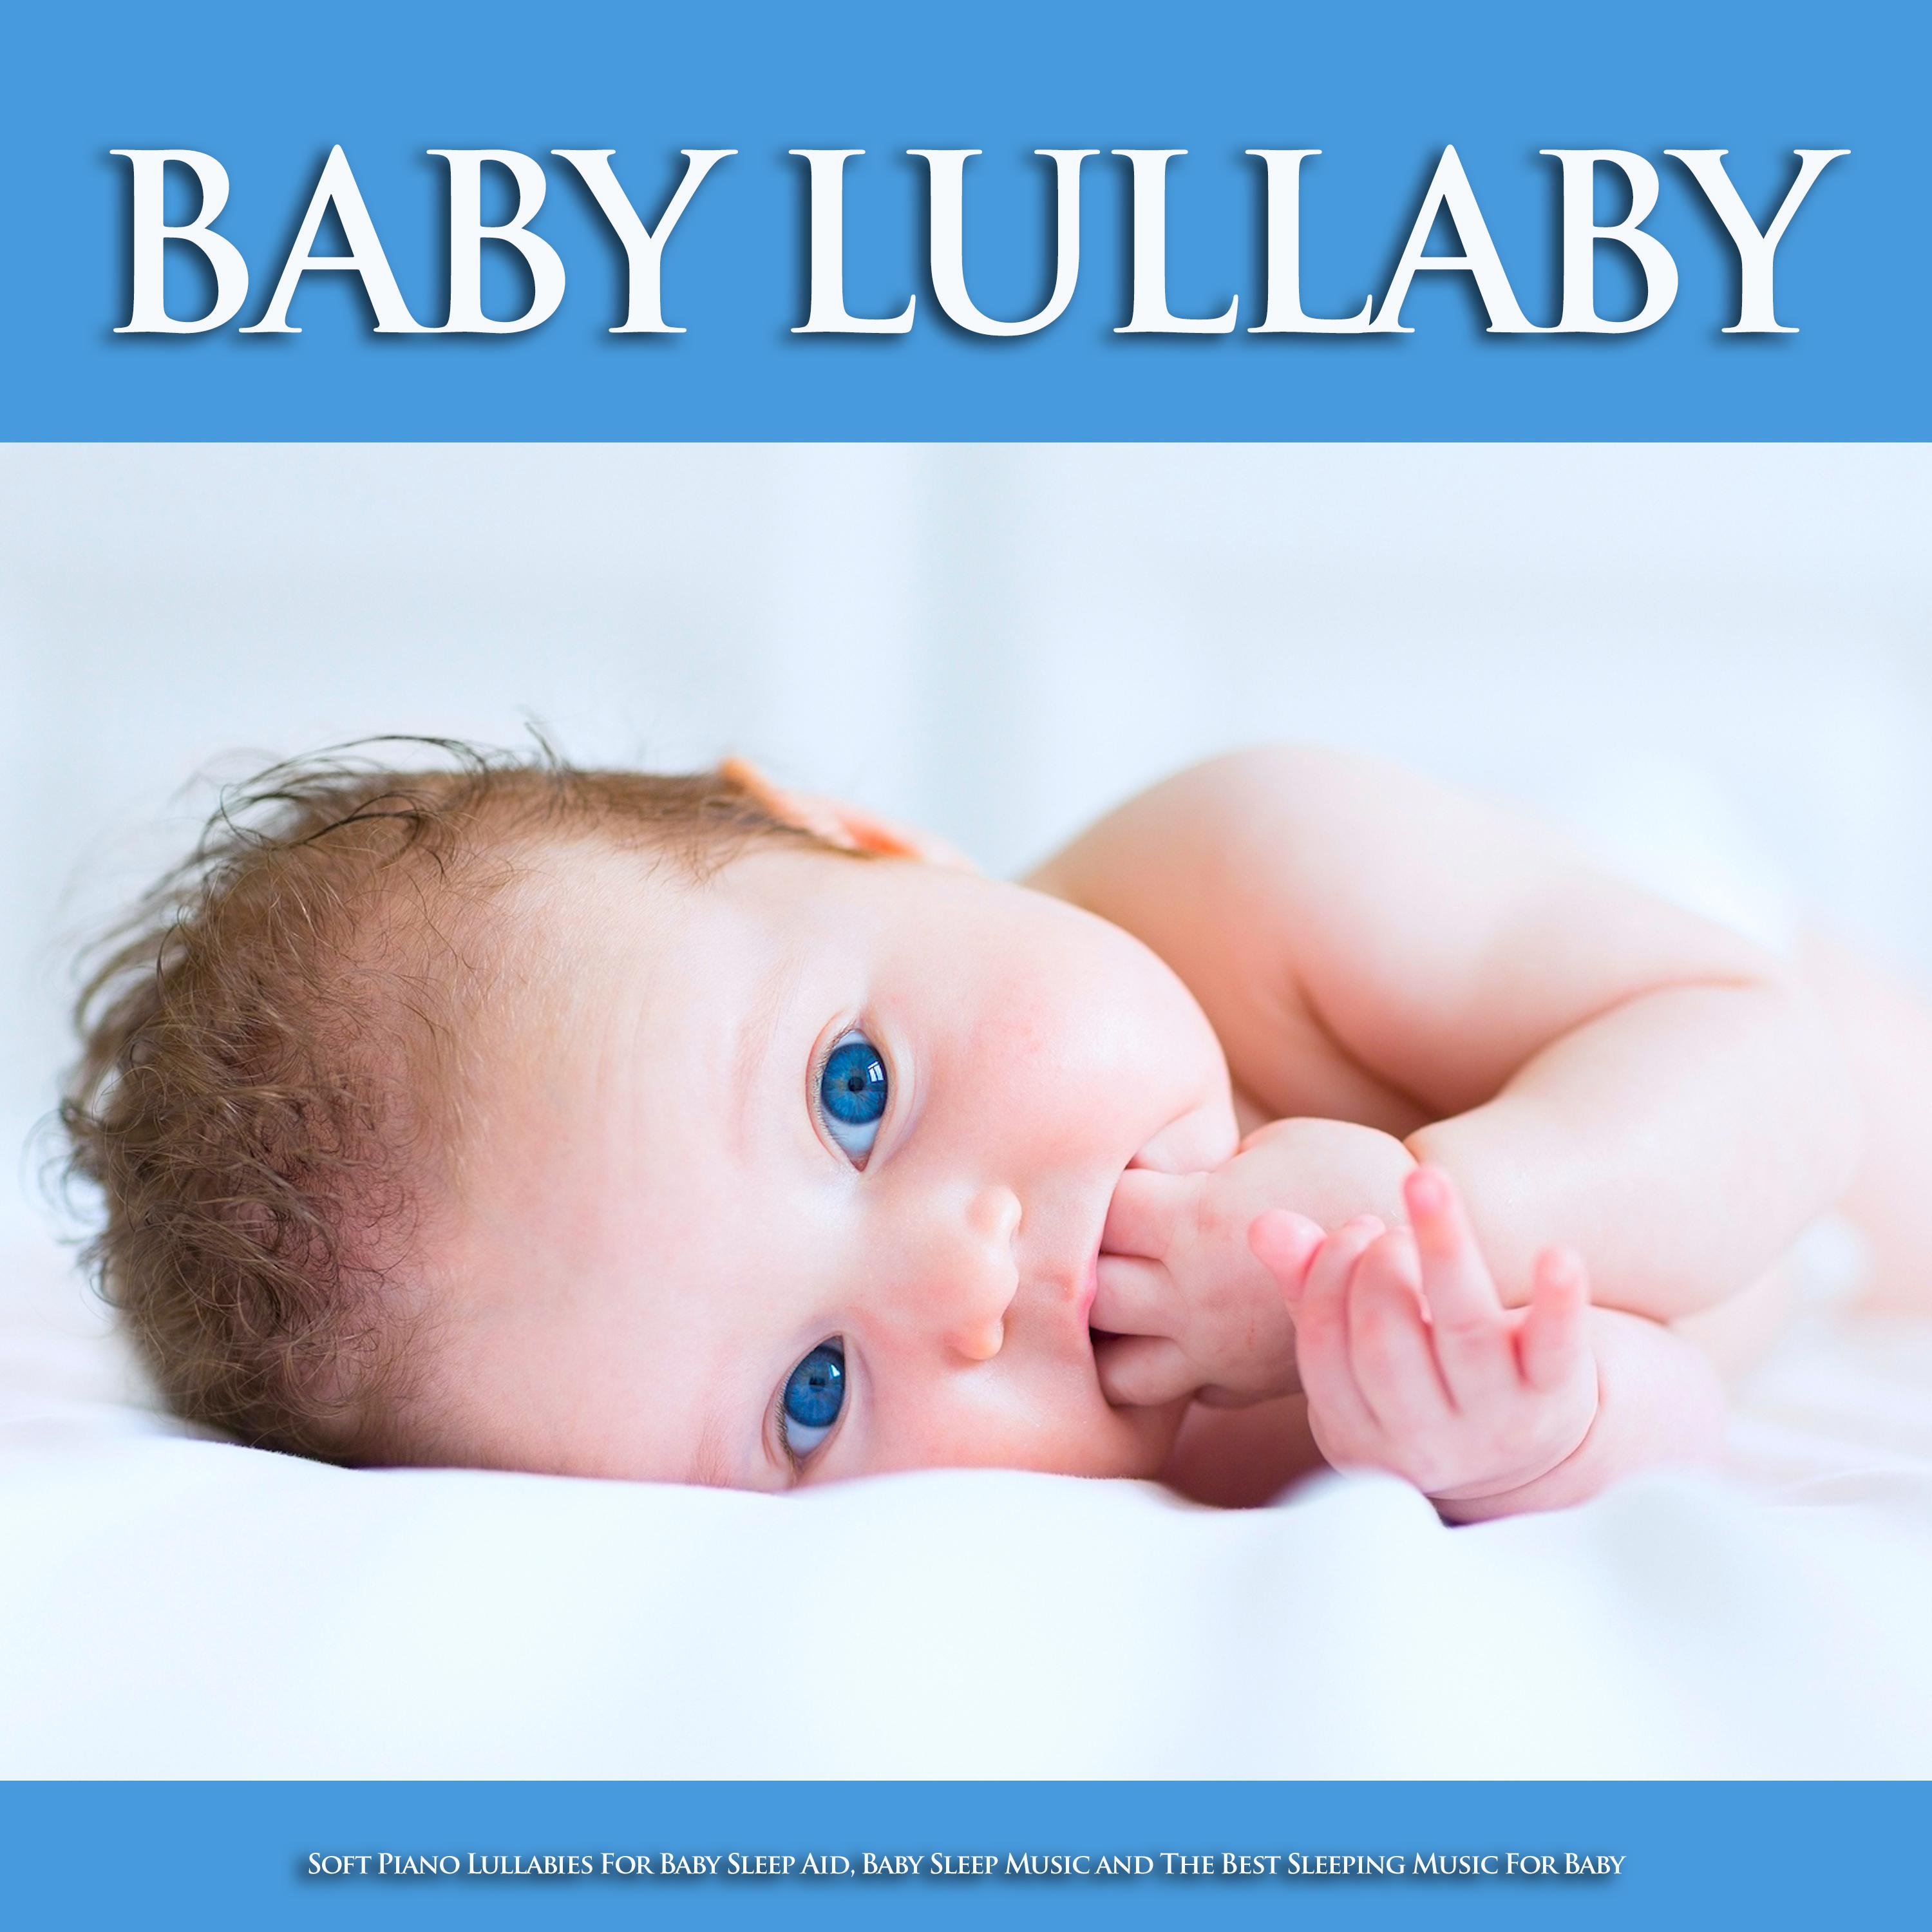 Baby Lullaby: Soft Piano Lullabies For Baby Sleep Aid, Baby Sleep Music and The Best Sleeping Music For Baby